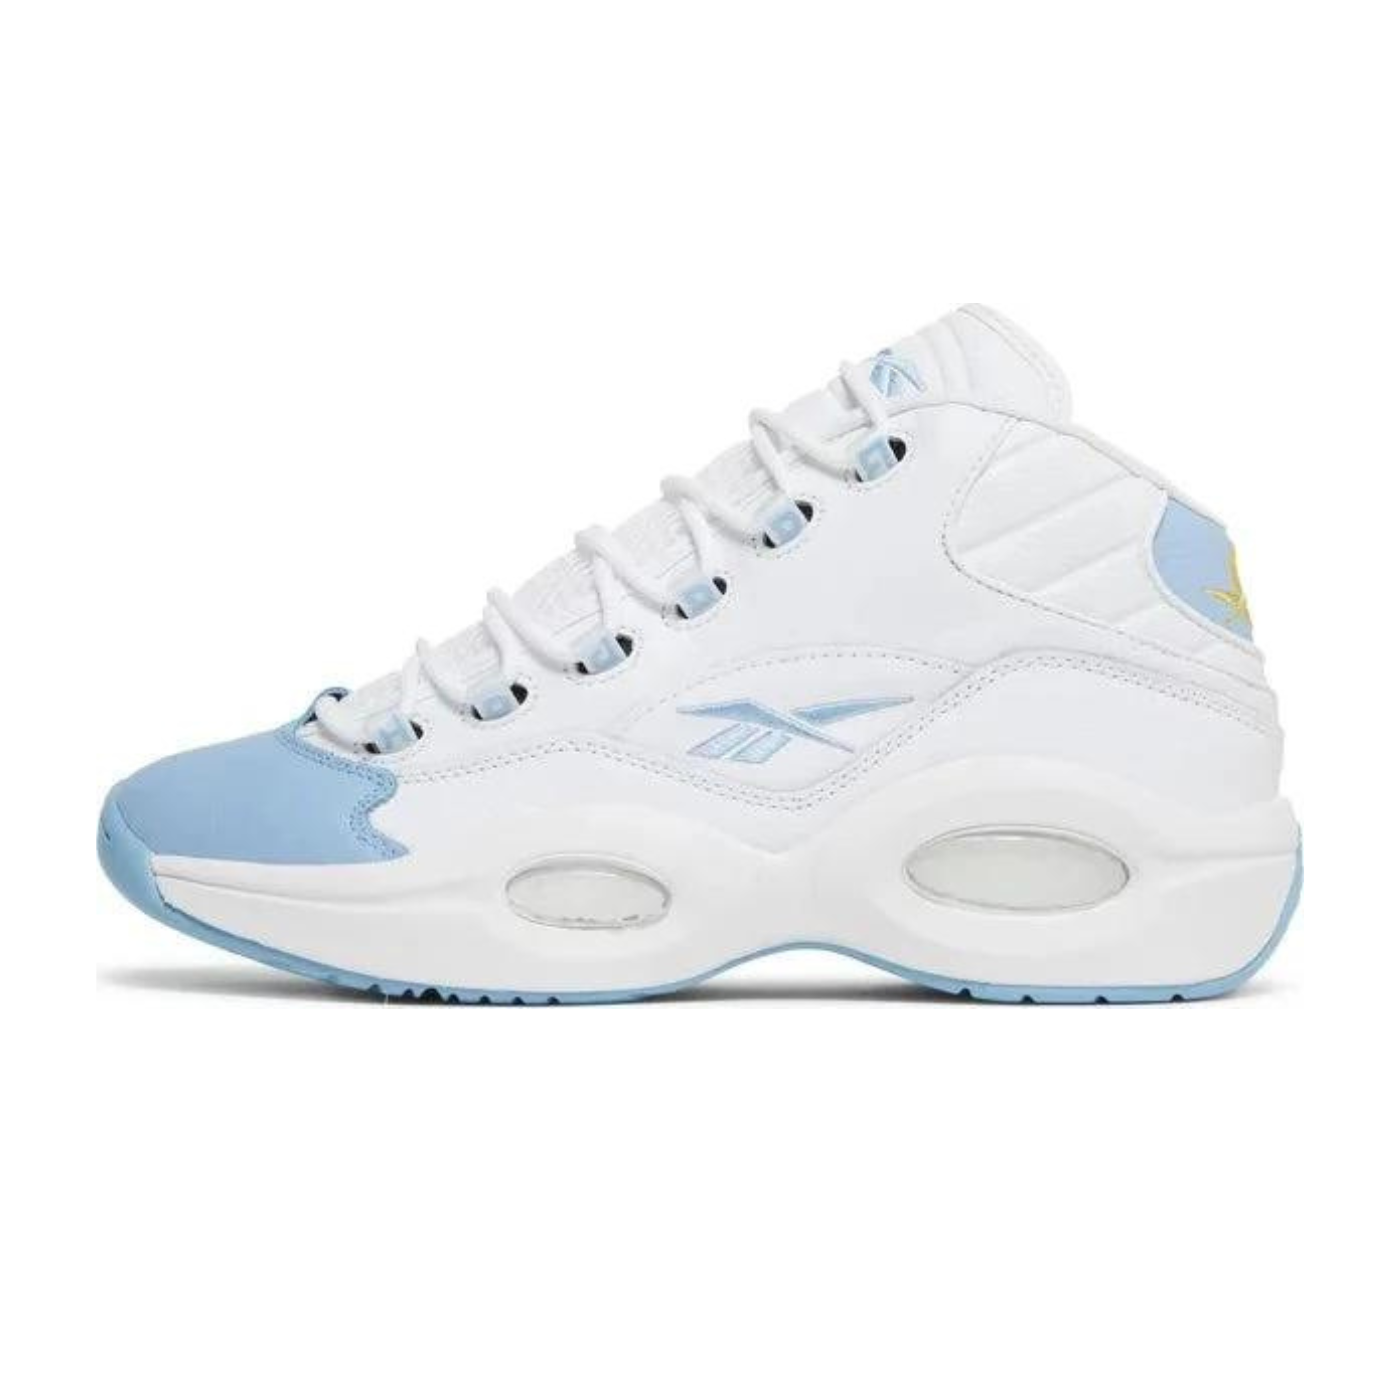 Men's Reebok Question Mid - "On to the Next"